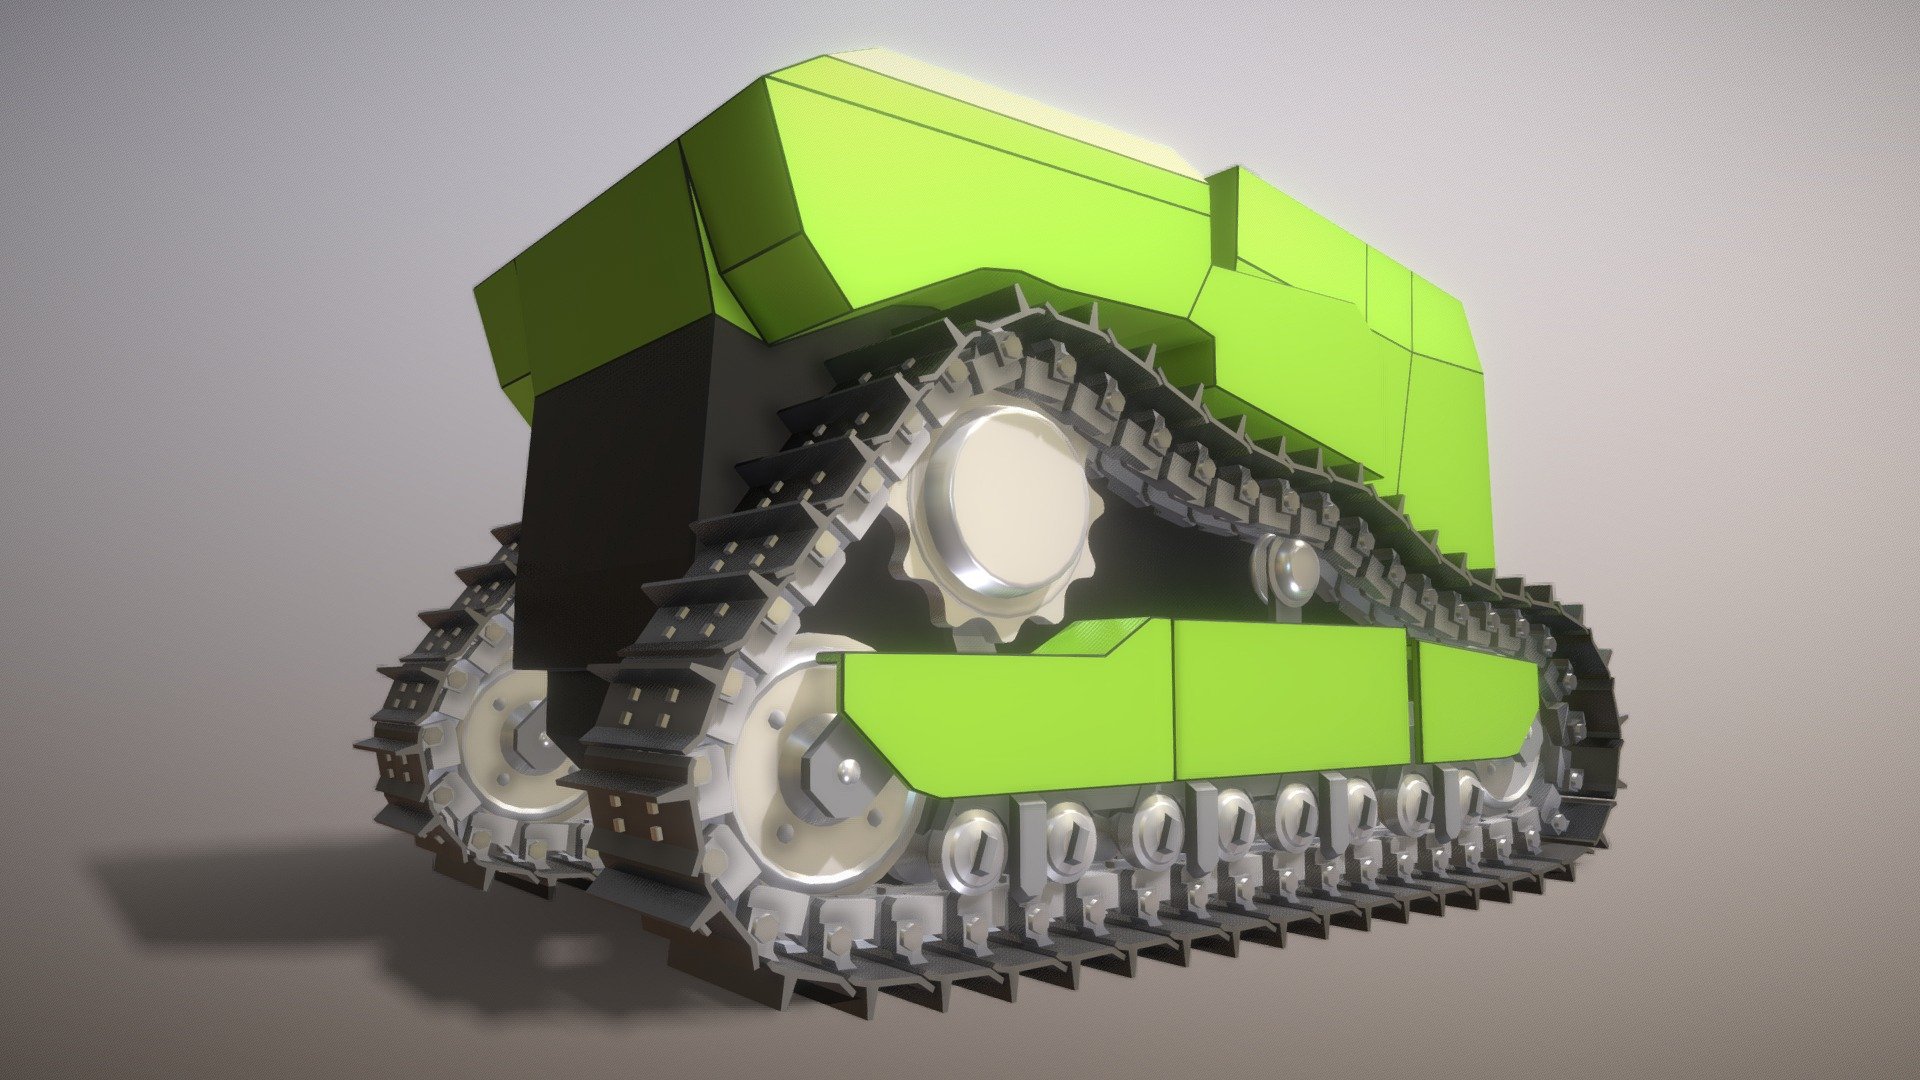 Bulldozer Undercarriage (Wip-4)

Now it's really rigged!

Older wips:




Wip-1

Wip-2

Wip-3





Used software and 3d-model creator.

Here on Sketchfab you can see or purchase some of our 3d-models which we are using in our projects for our software VIS-All-3D.

This 3d model or those 3d models as well as the textures were created by 3DHaupt for the software service John GmbH

Modeled and textured with Blender 3D - Bulldozer Undercarriage (Wip-4) - 3D model by VIS-All-3D (@VIS-All) 3d model